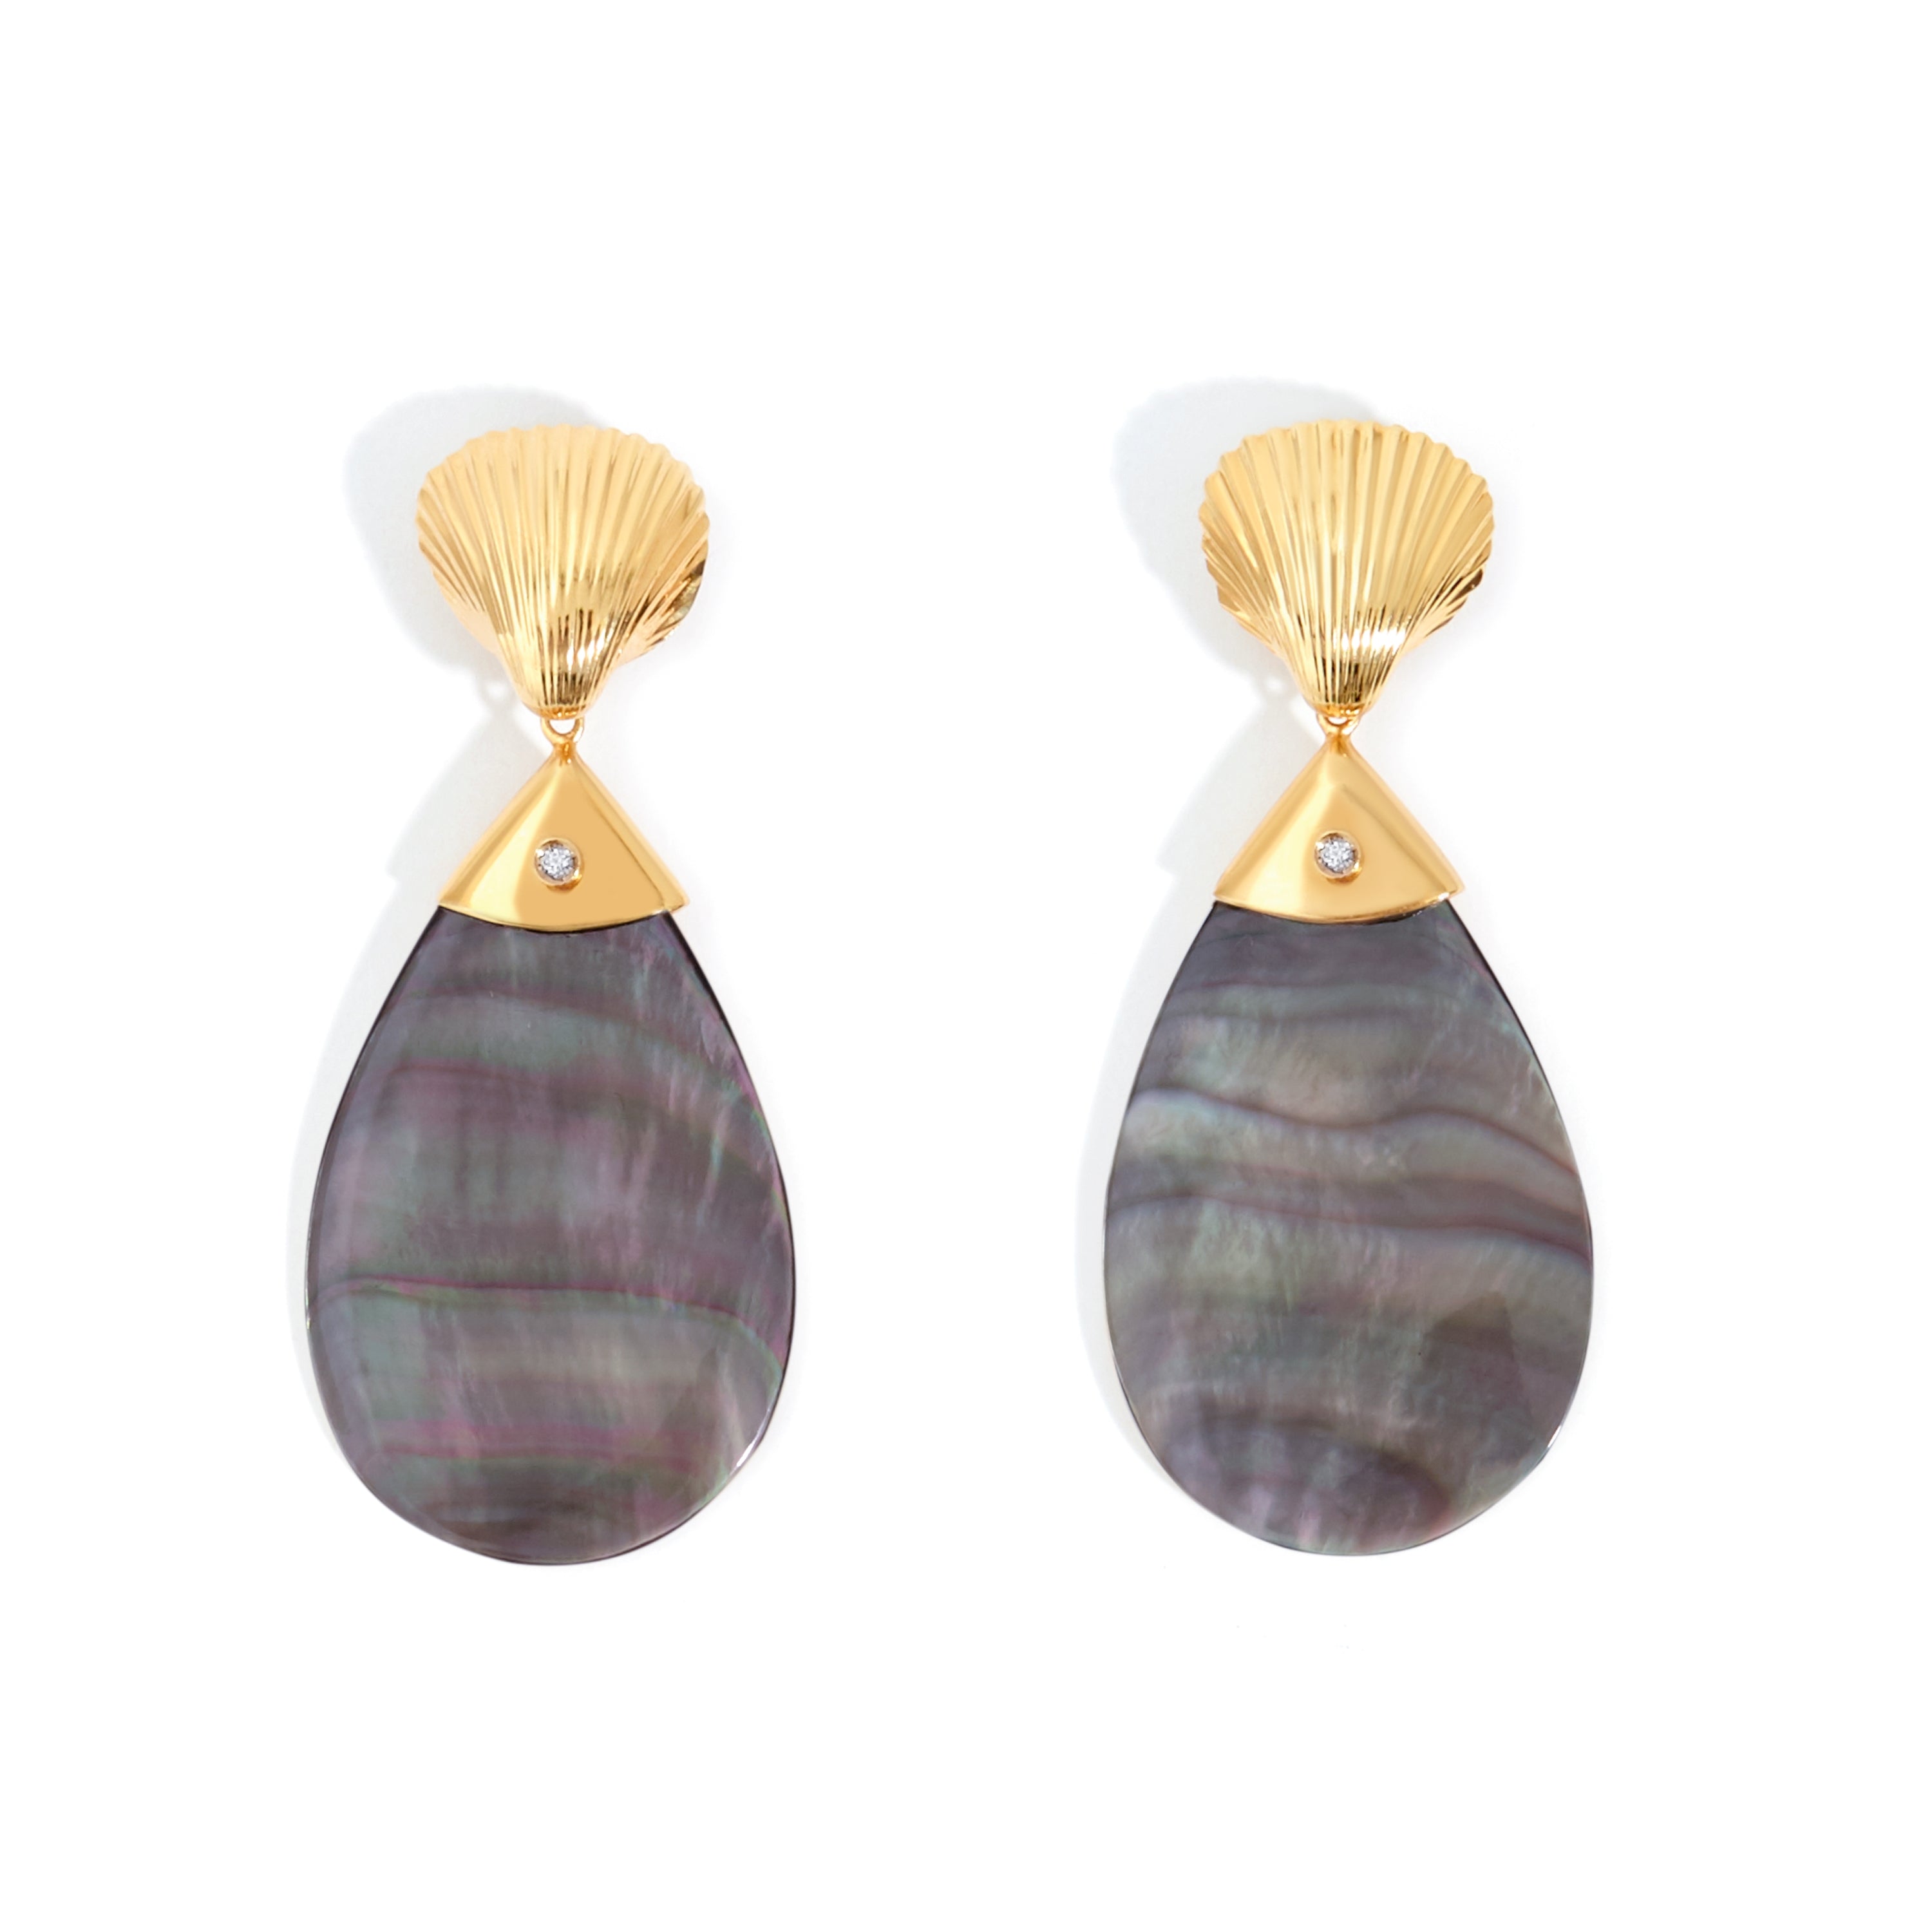 MADREPERLA NERA EARRING IN 18K YELLOW GOLD PLATED SILVER WITH MOTHER OF PEARL AND DIAMOND